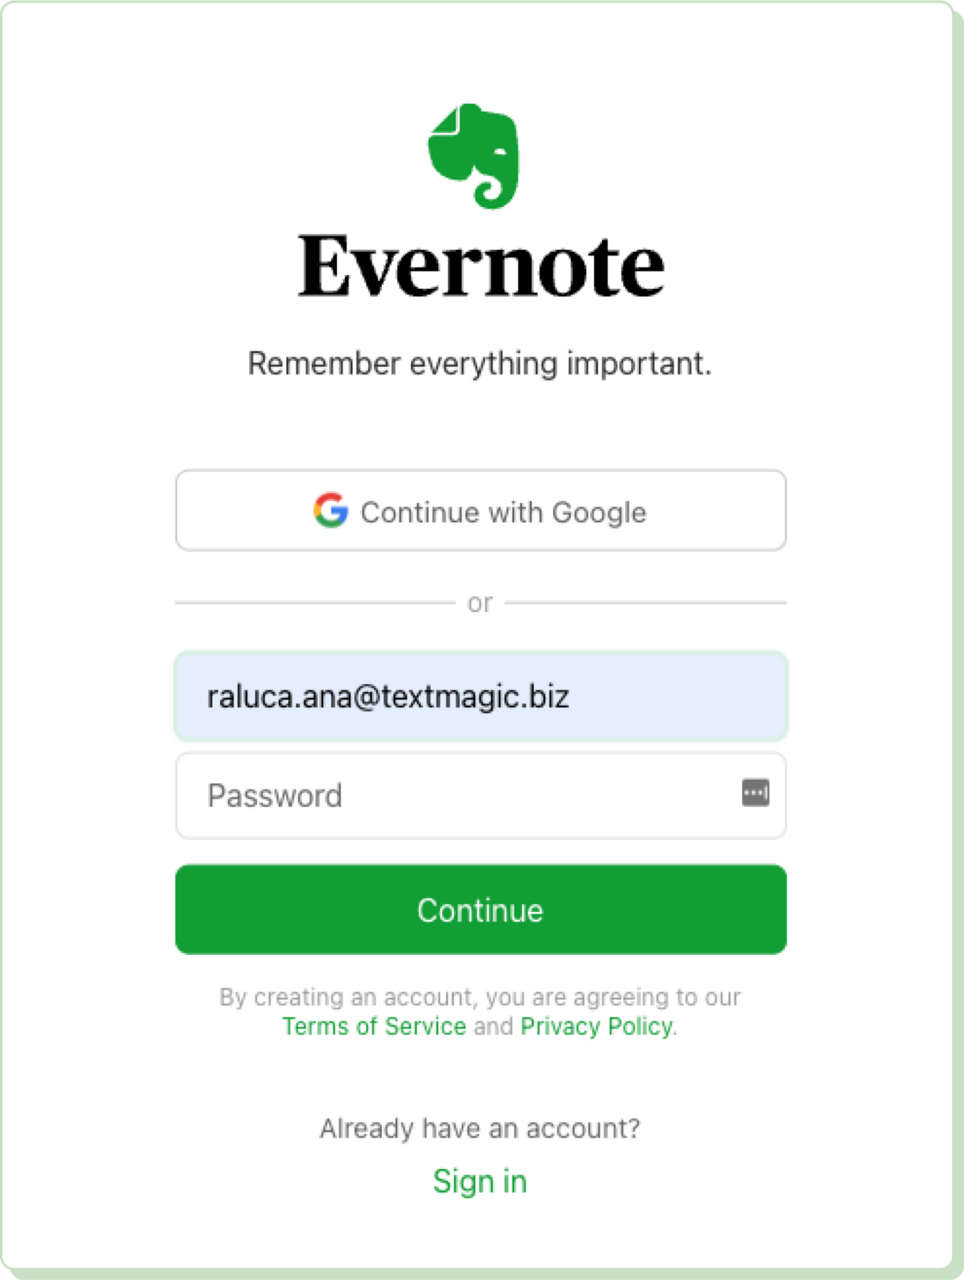 Evernote landing page form